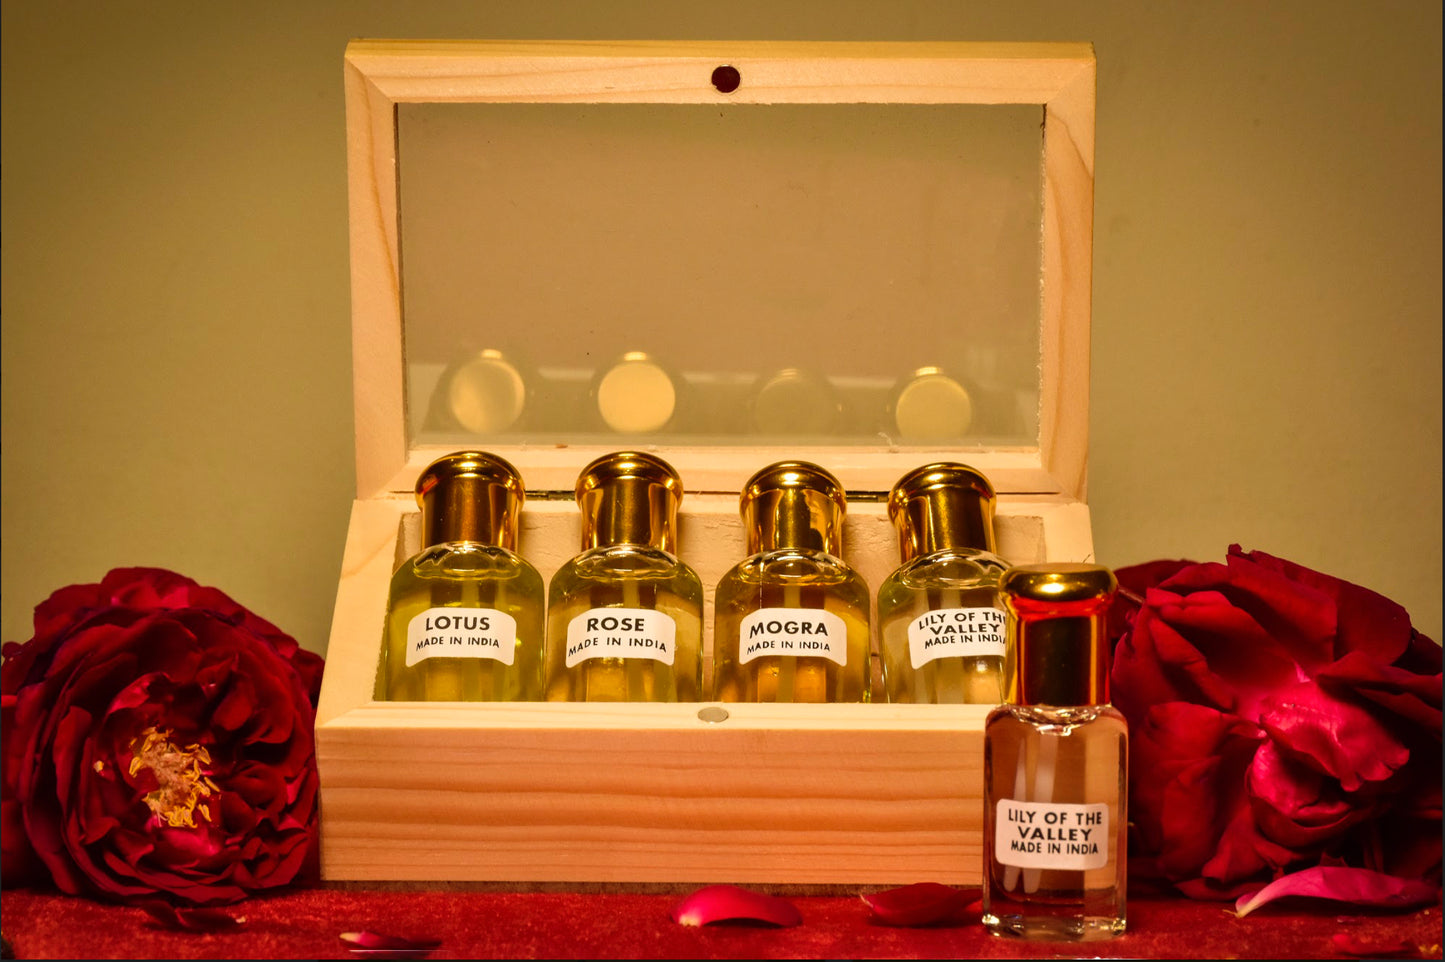 A collection of four floral scents contained in a wooden box.